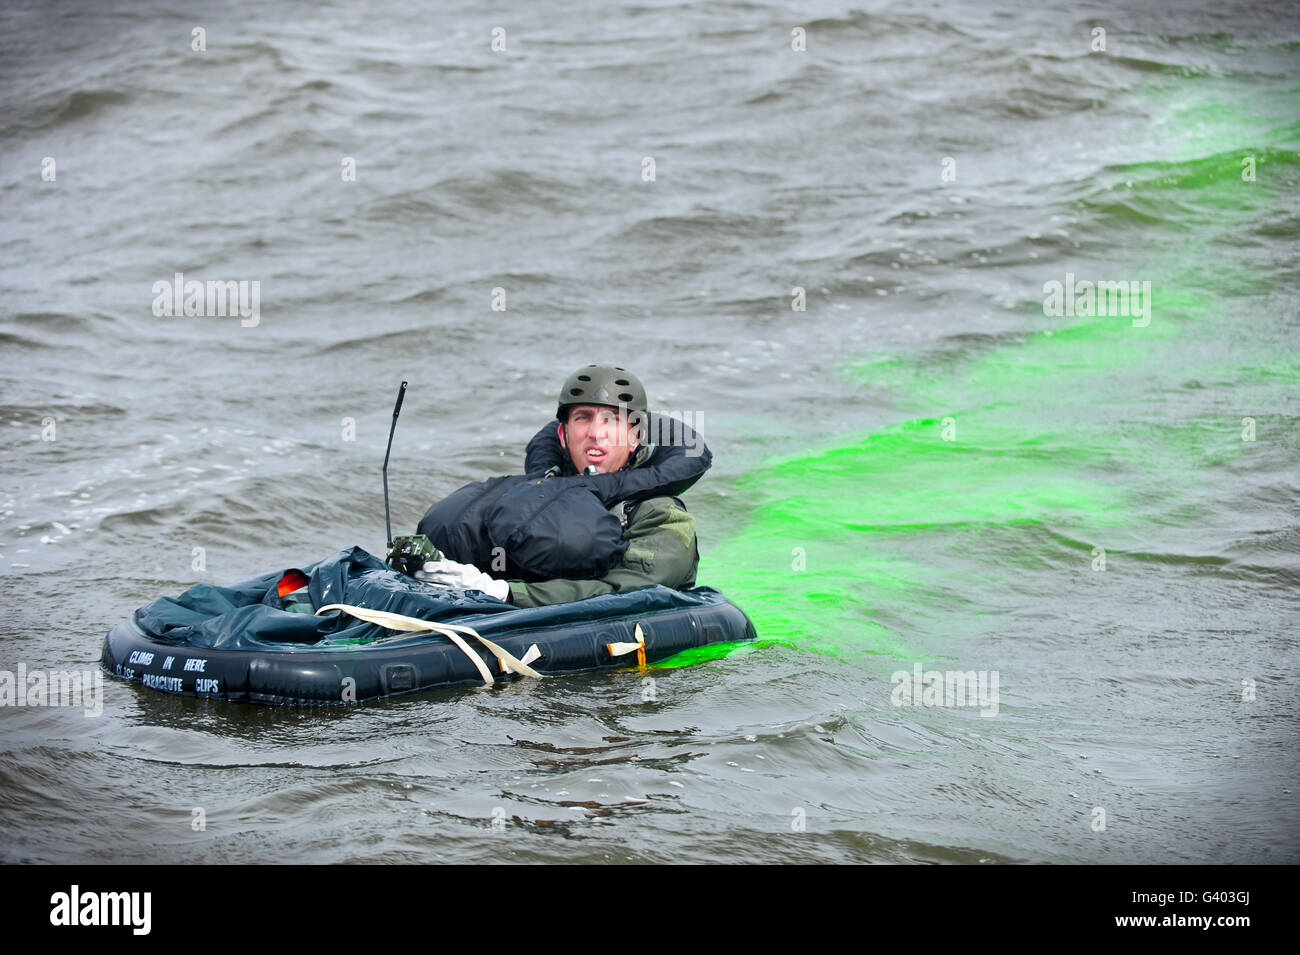 A downed pilot uses radio communication and sea dye to provide his location. Stock Photo